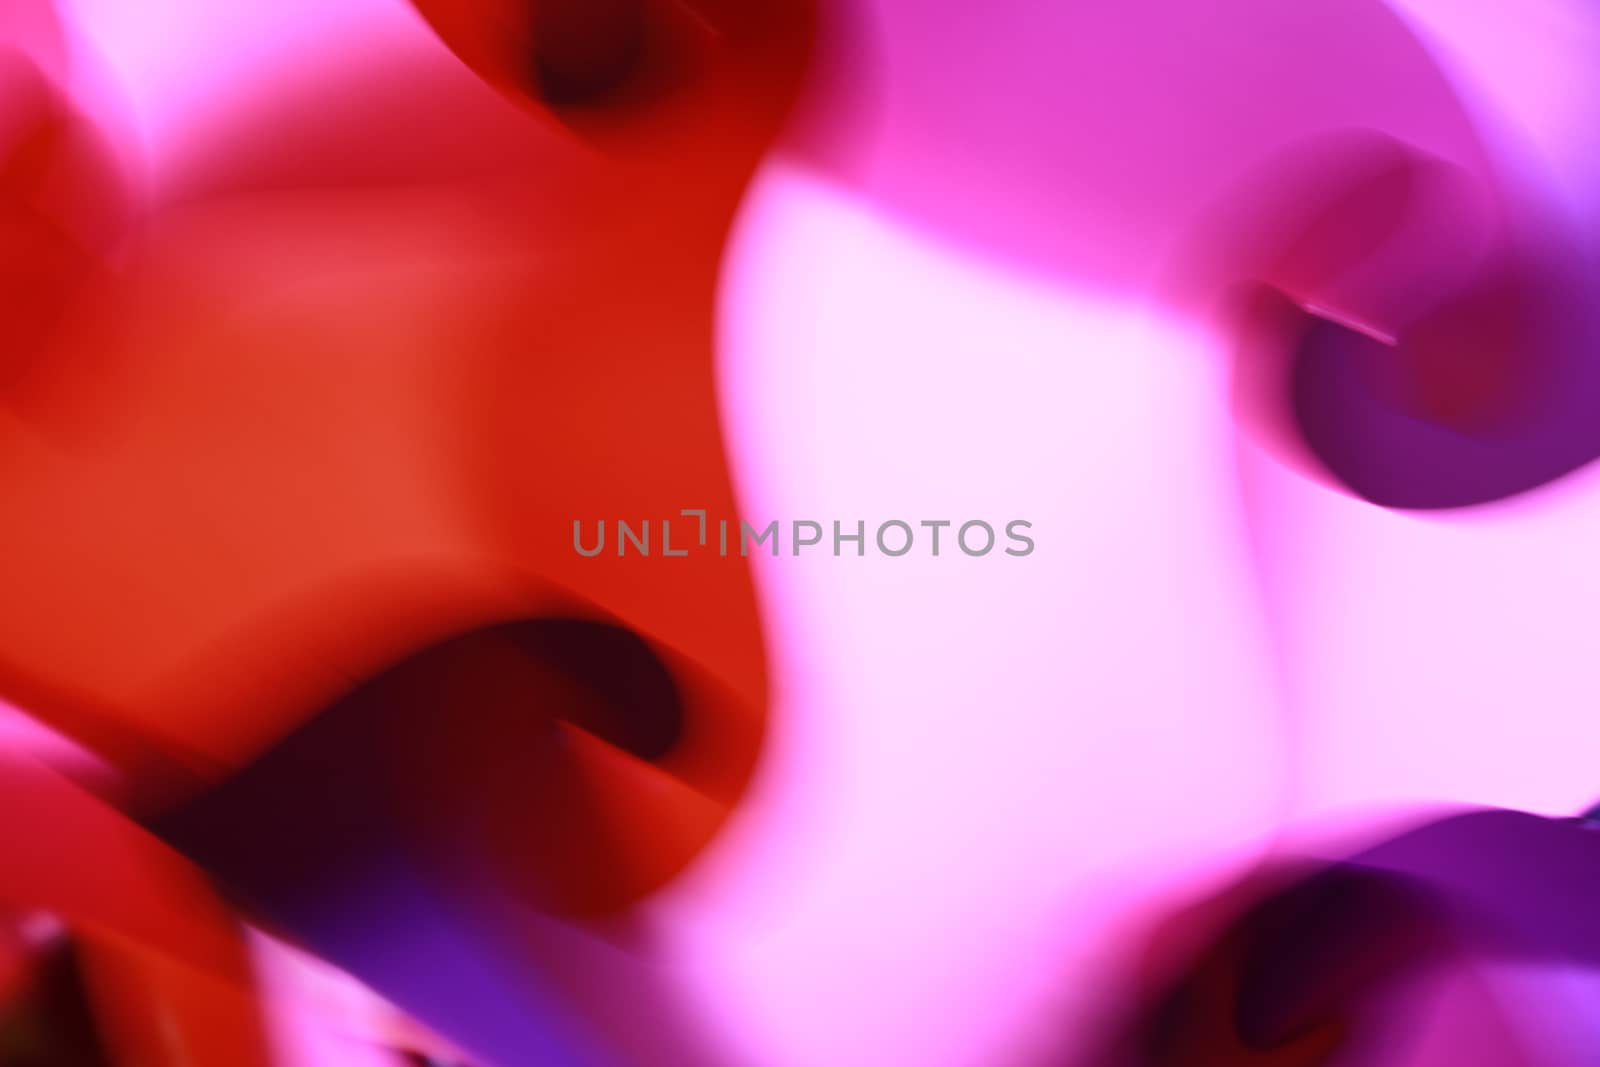 A background with an abstract design of swirling patterns in pink and red colors.